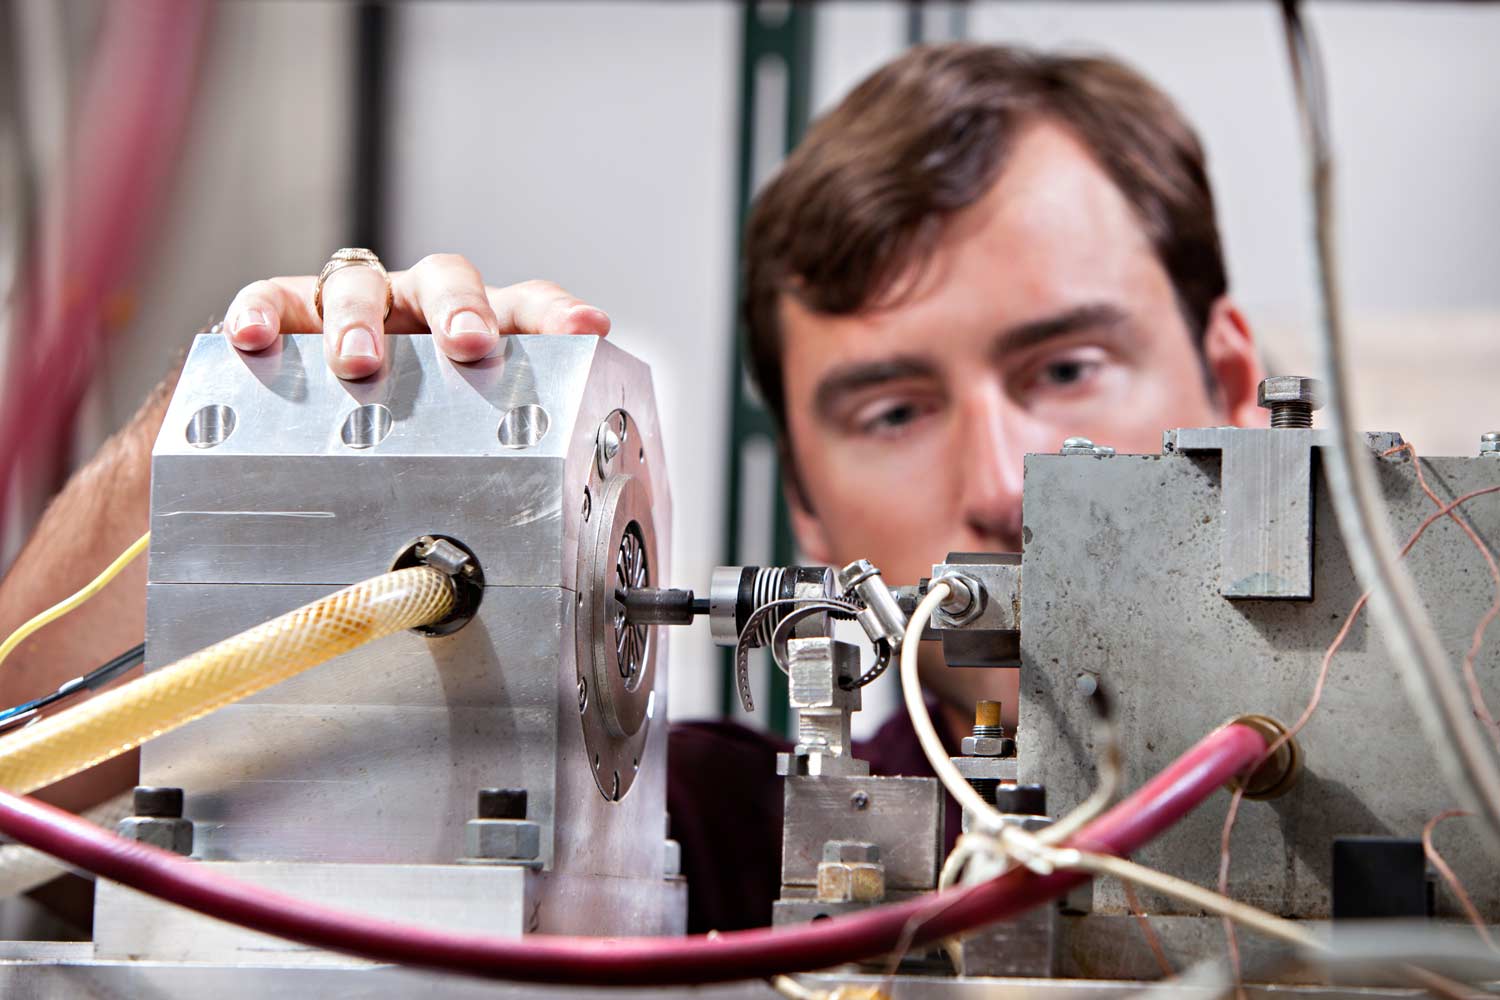 Texas A&M student conducting research on industrial equipment.